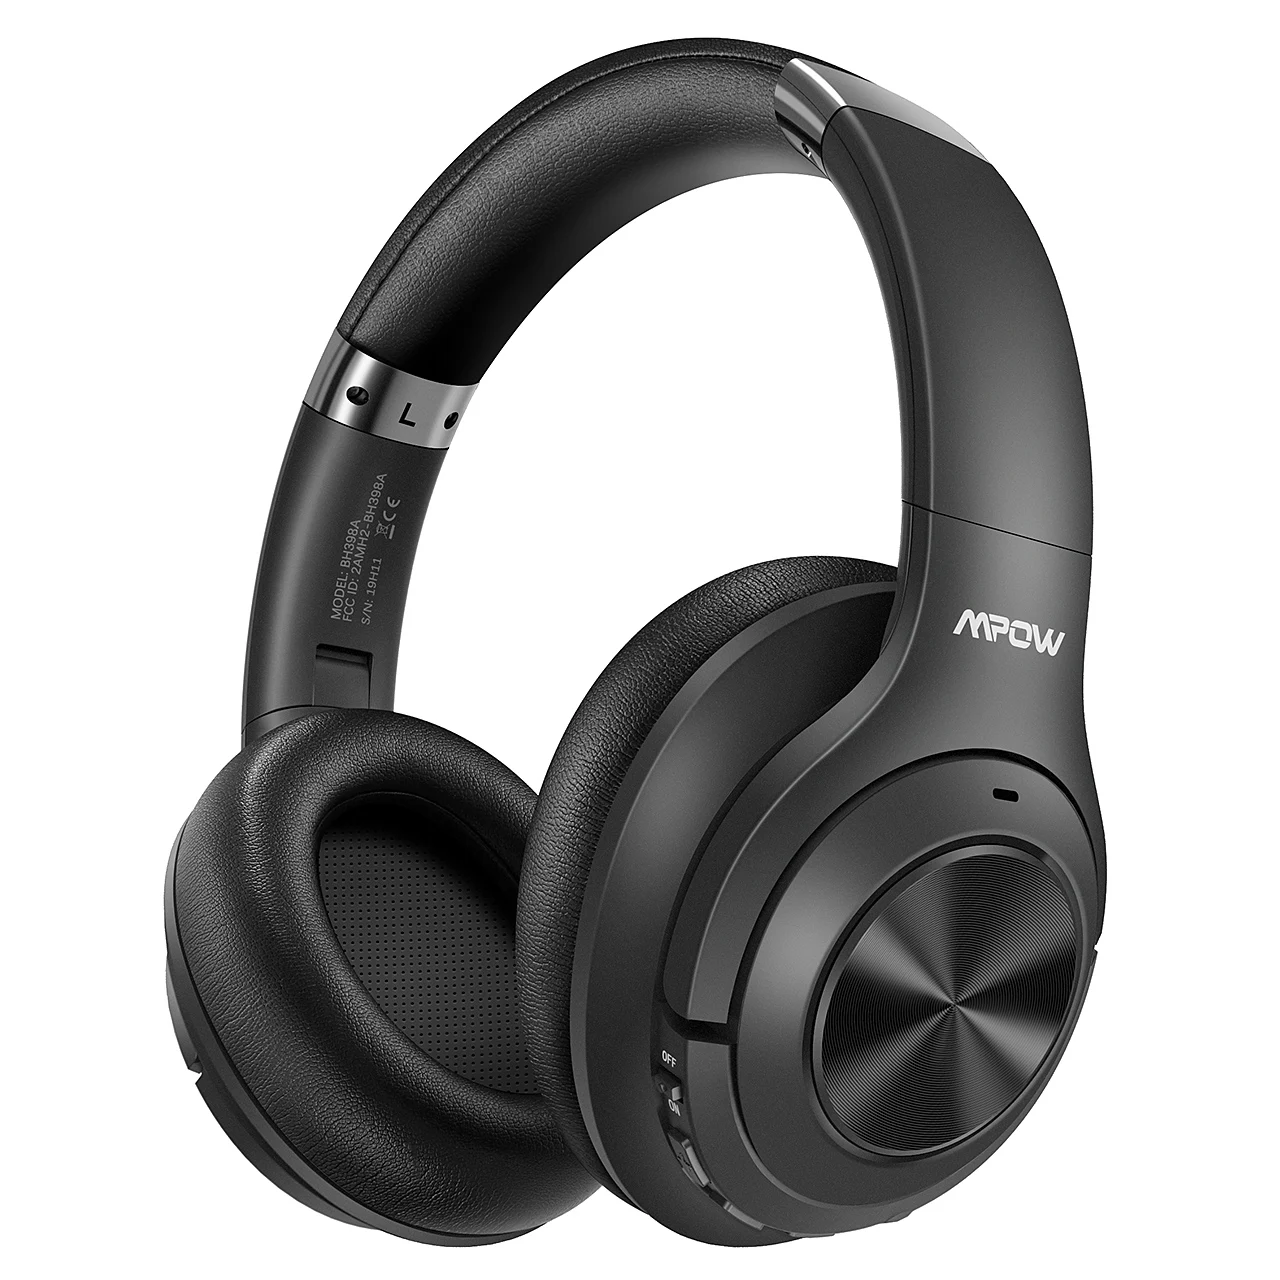 Mpow h21 hybrid active noise cancelling headset wireless bluetooth 5.0 music headphones 40h playtime cvc 6.0 for iphone 11 xiaomi